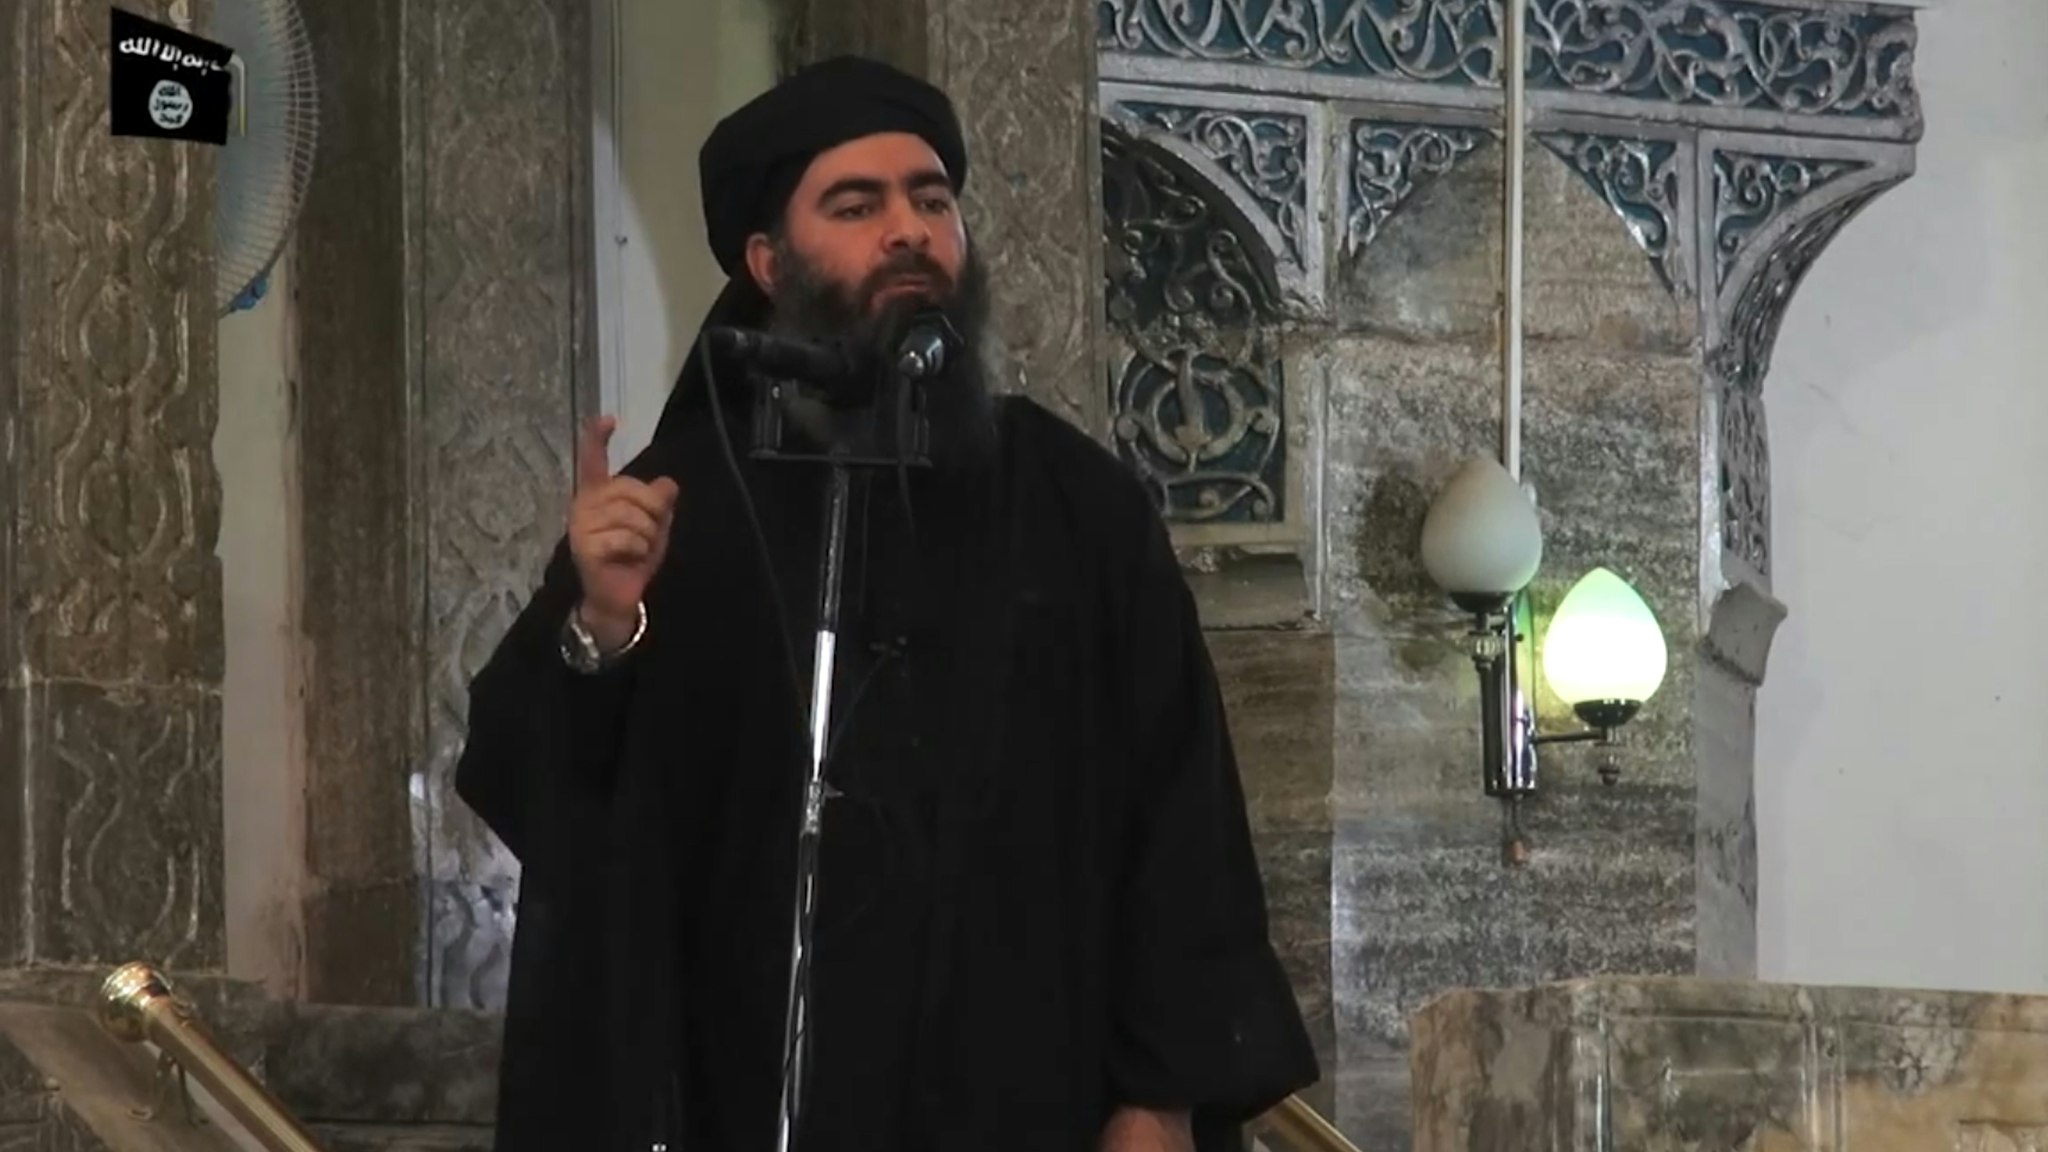 This July 5, 2014 photo shows an image grab taken from a propaganda video released by al-Furqan Media allegedly showing the leader of the Islamic State (IS) jihadist group, Abu Bakr al-Baghdadi, aka Caliph Ibrahim, adressing Muslim worshippers at a mosque in the militant-held northern Iraqi city of Mosul. Baghdadi, who on June 29 proclaimed a "caliphate" straddling Syria and Iraq, purportedly ordered all Muslims to obey him in the video released on social media. - In early 2014 the self-styled Islamic State entered the northern Syrian city of Raqqa, declaring it their capital and beginning a reign of terror marked by grisly public executions. Armed sharia police patrolled the streets as "enemies" of the regime were crucified or decapitated, their severed heads impaled on spikes in the city square. (Photo by - / AFP) (Photo by -/AFP via Getty Images)